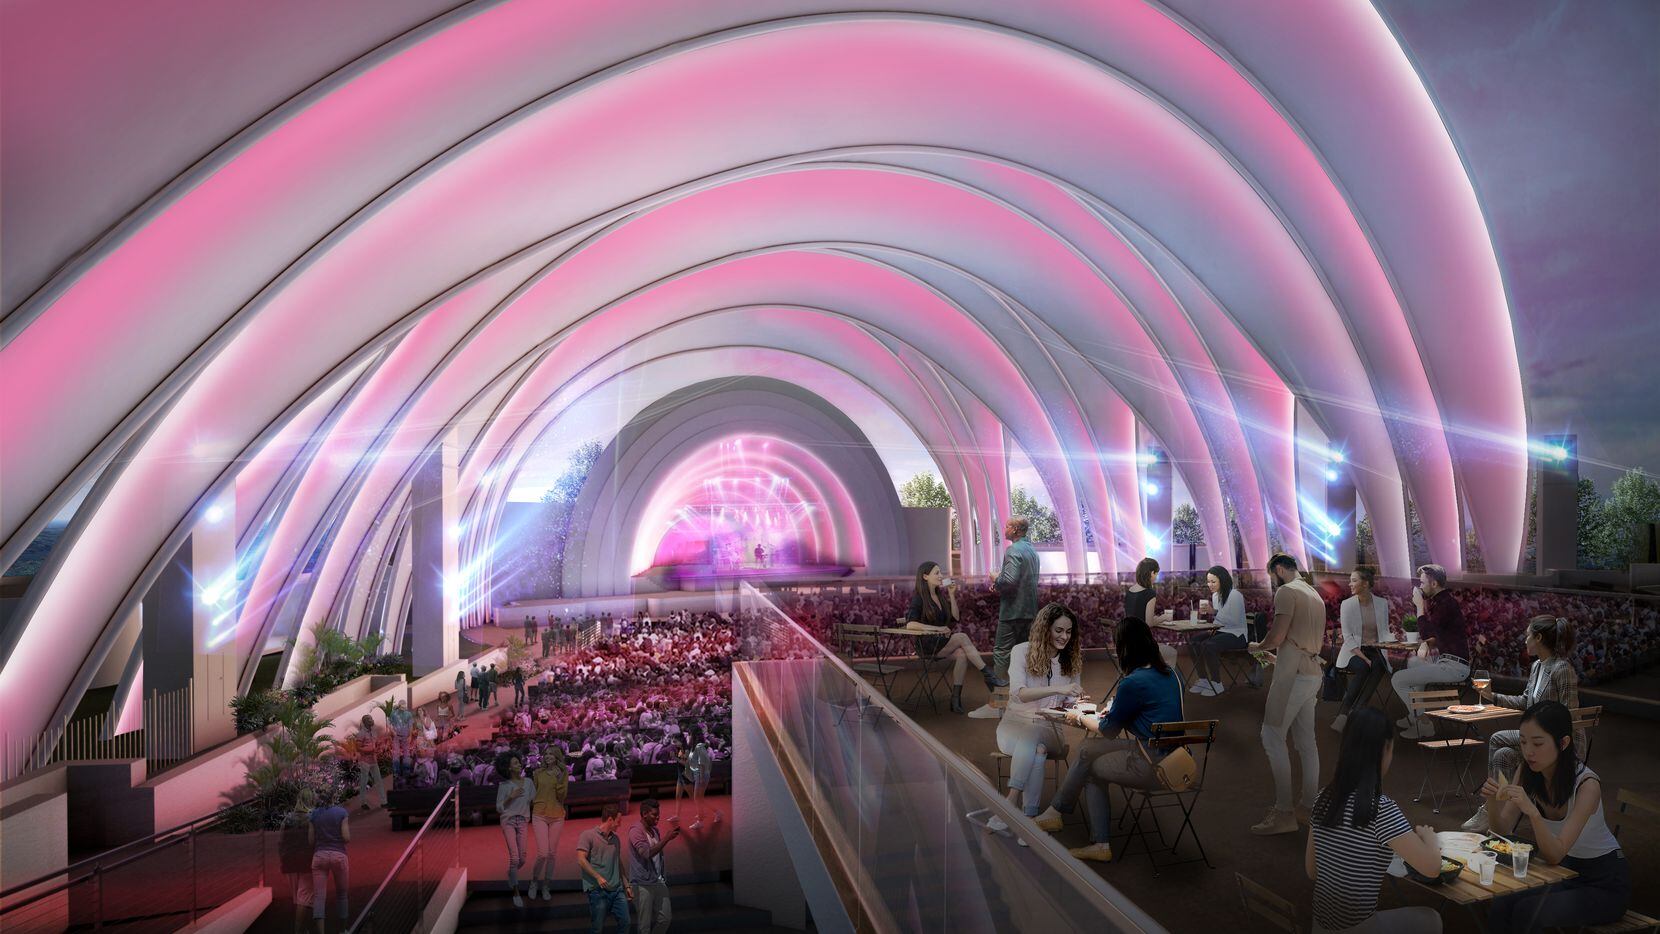 Rendering of the proposed expansion of the Fair Park Band Shell by Overland Partners....